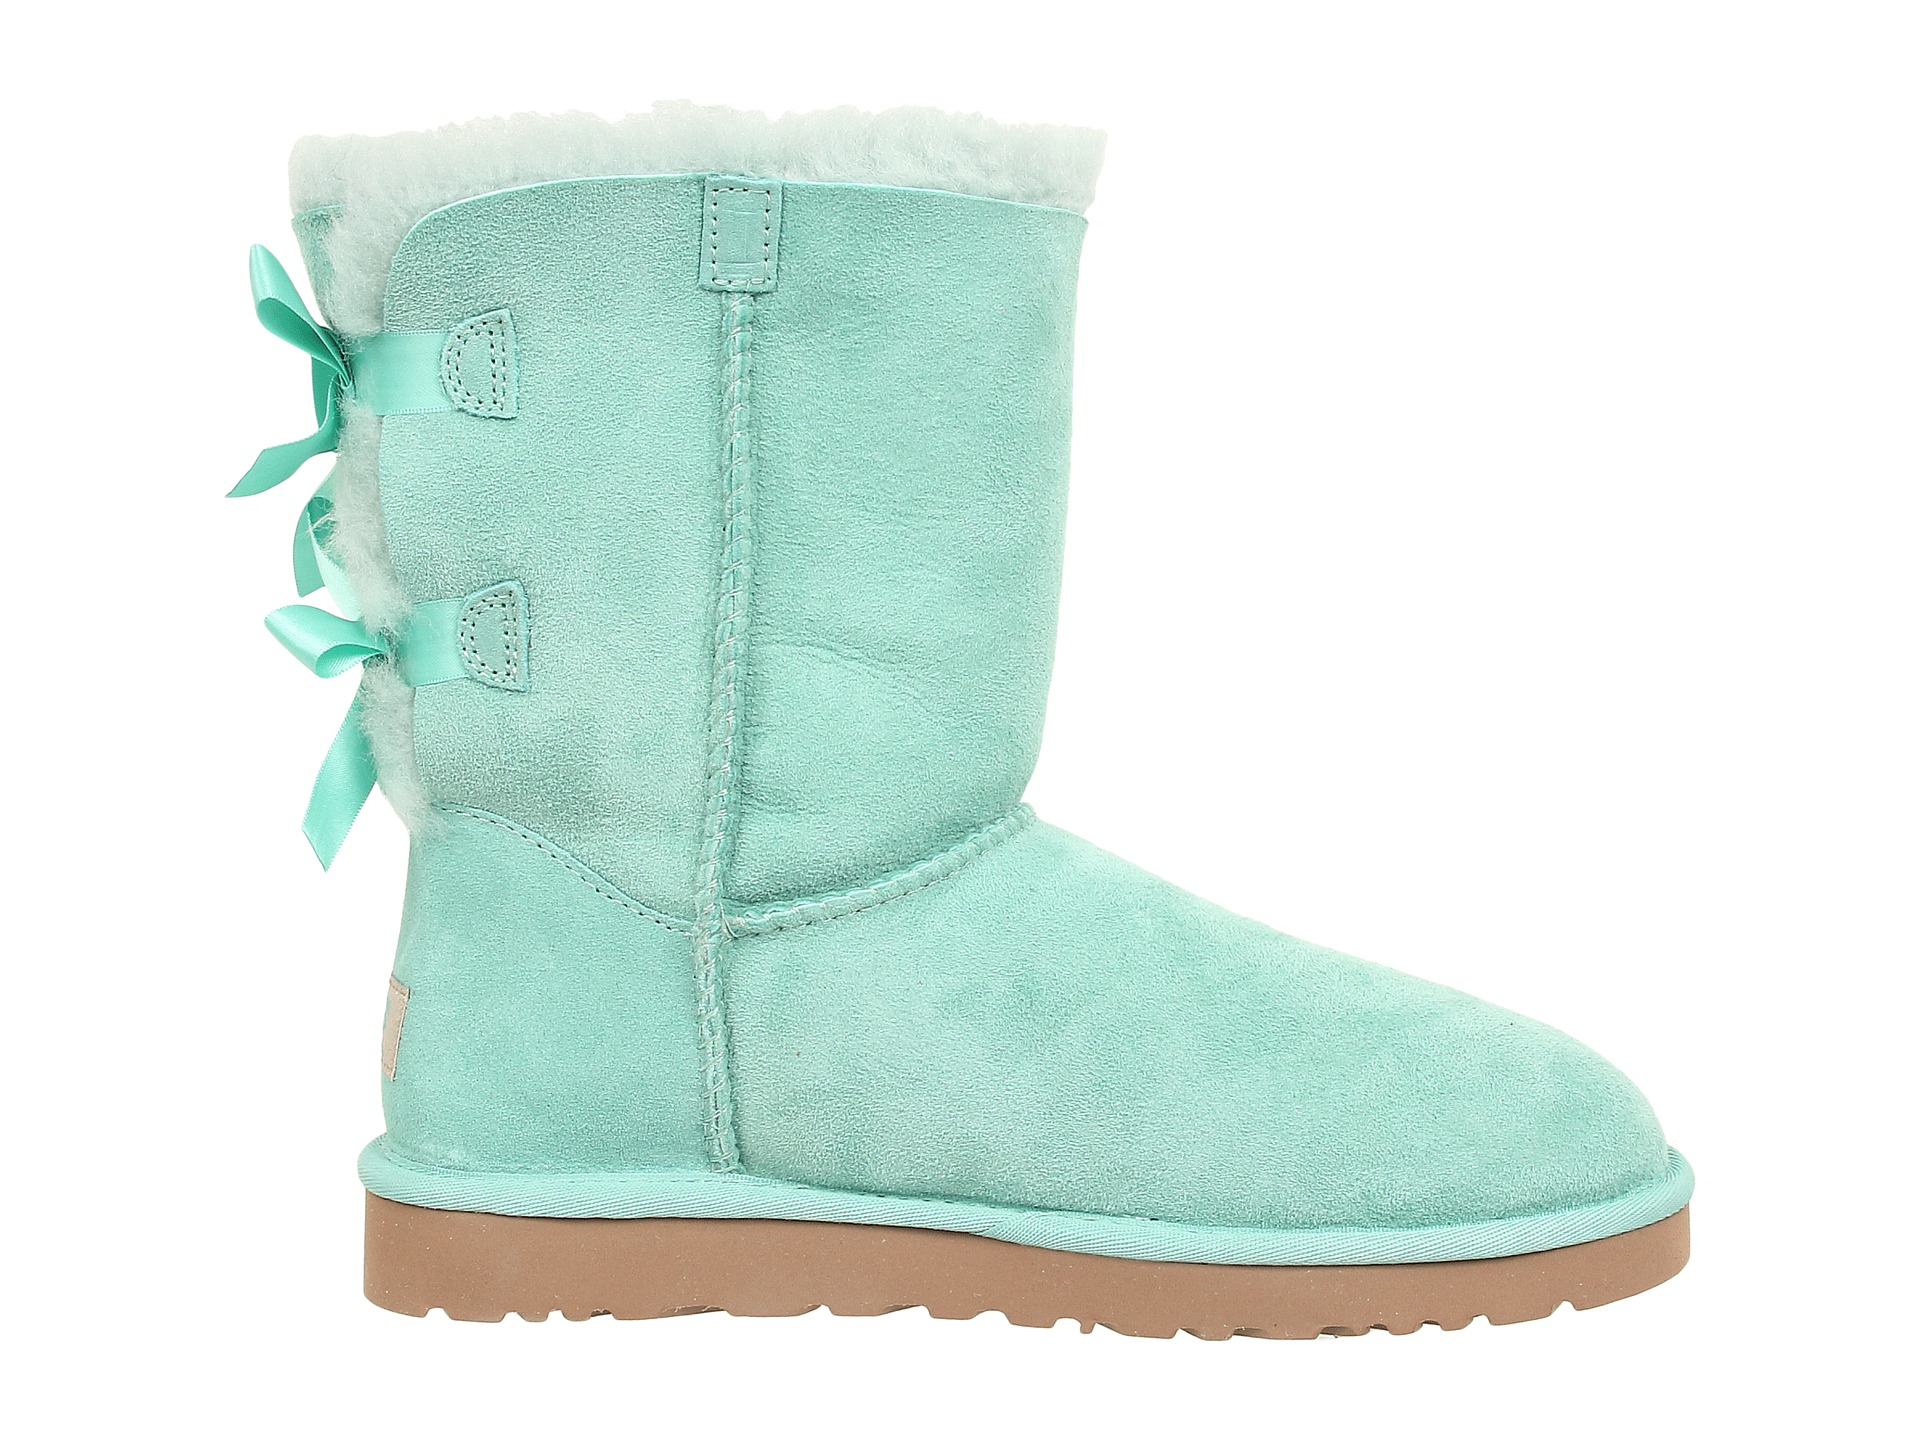 Lyst - Ugg Bailey Bow in Green